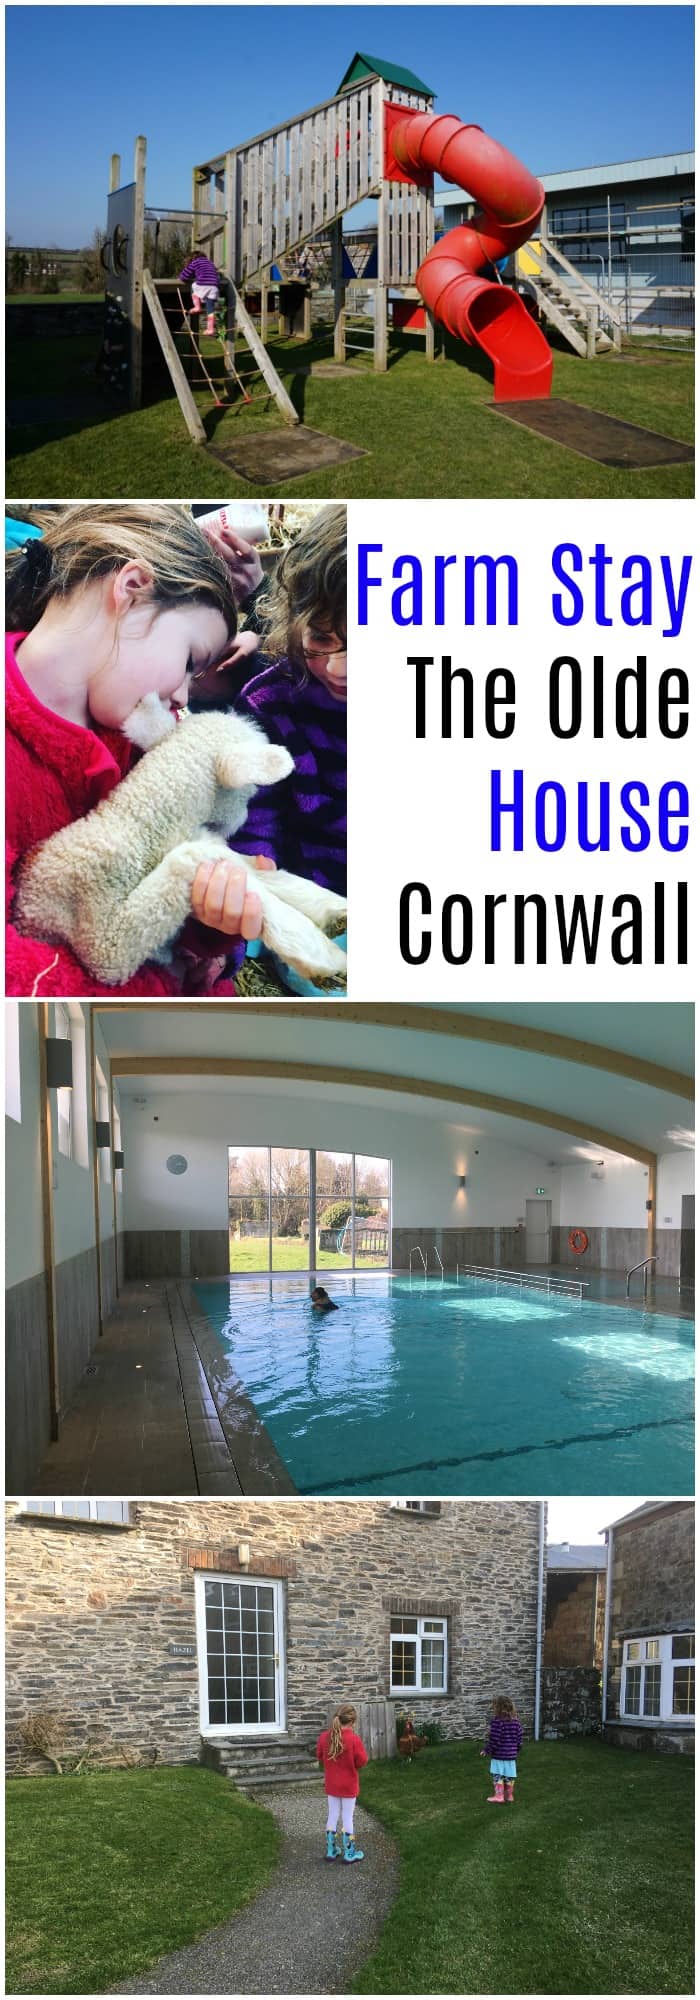 Farm Stay at The Olde House Cornwall #LoveCornwall #Cornwall365 #FamilyTravel #TravelWithKids 